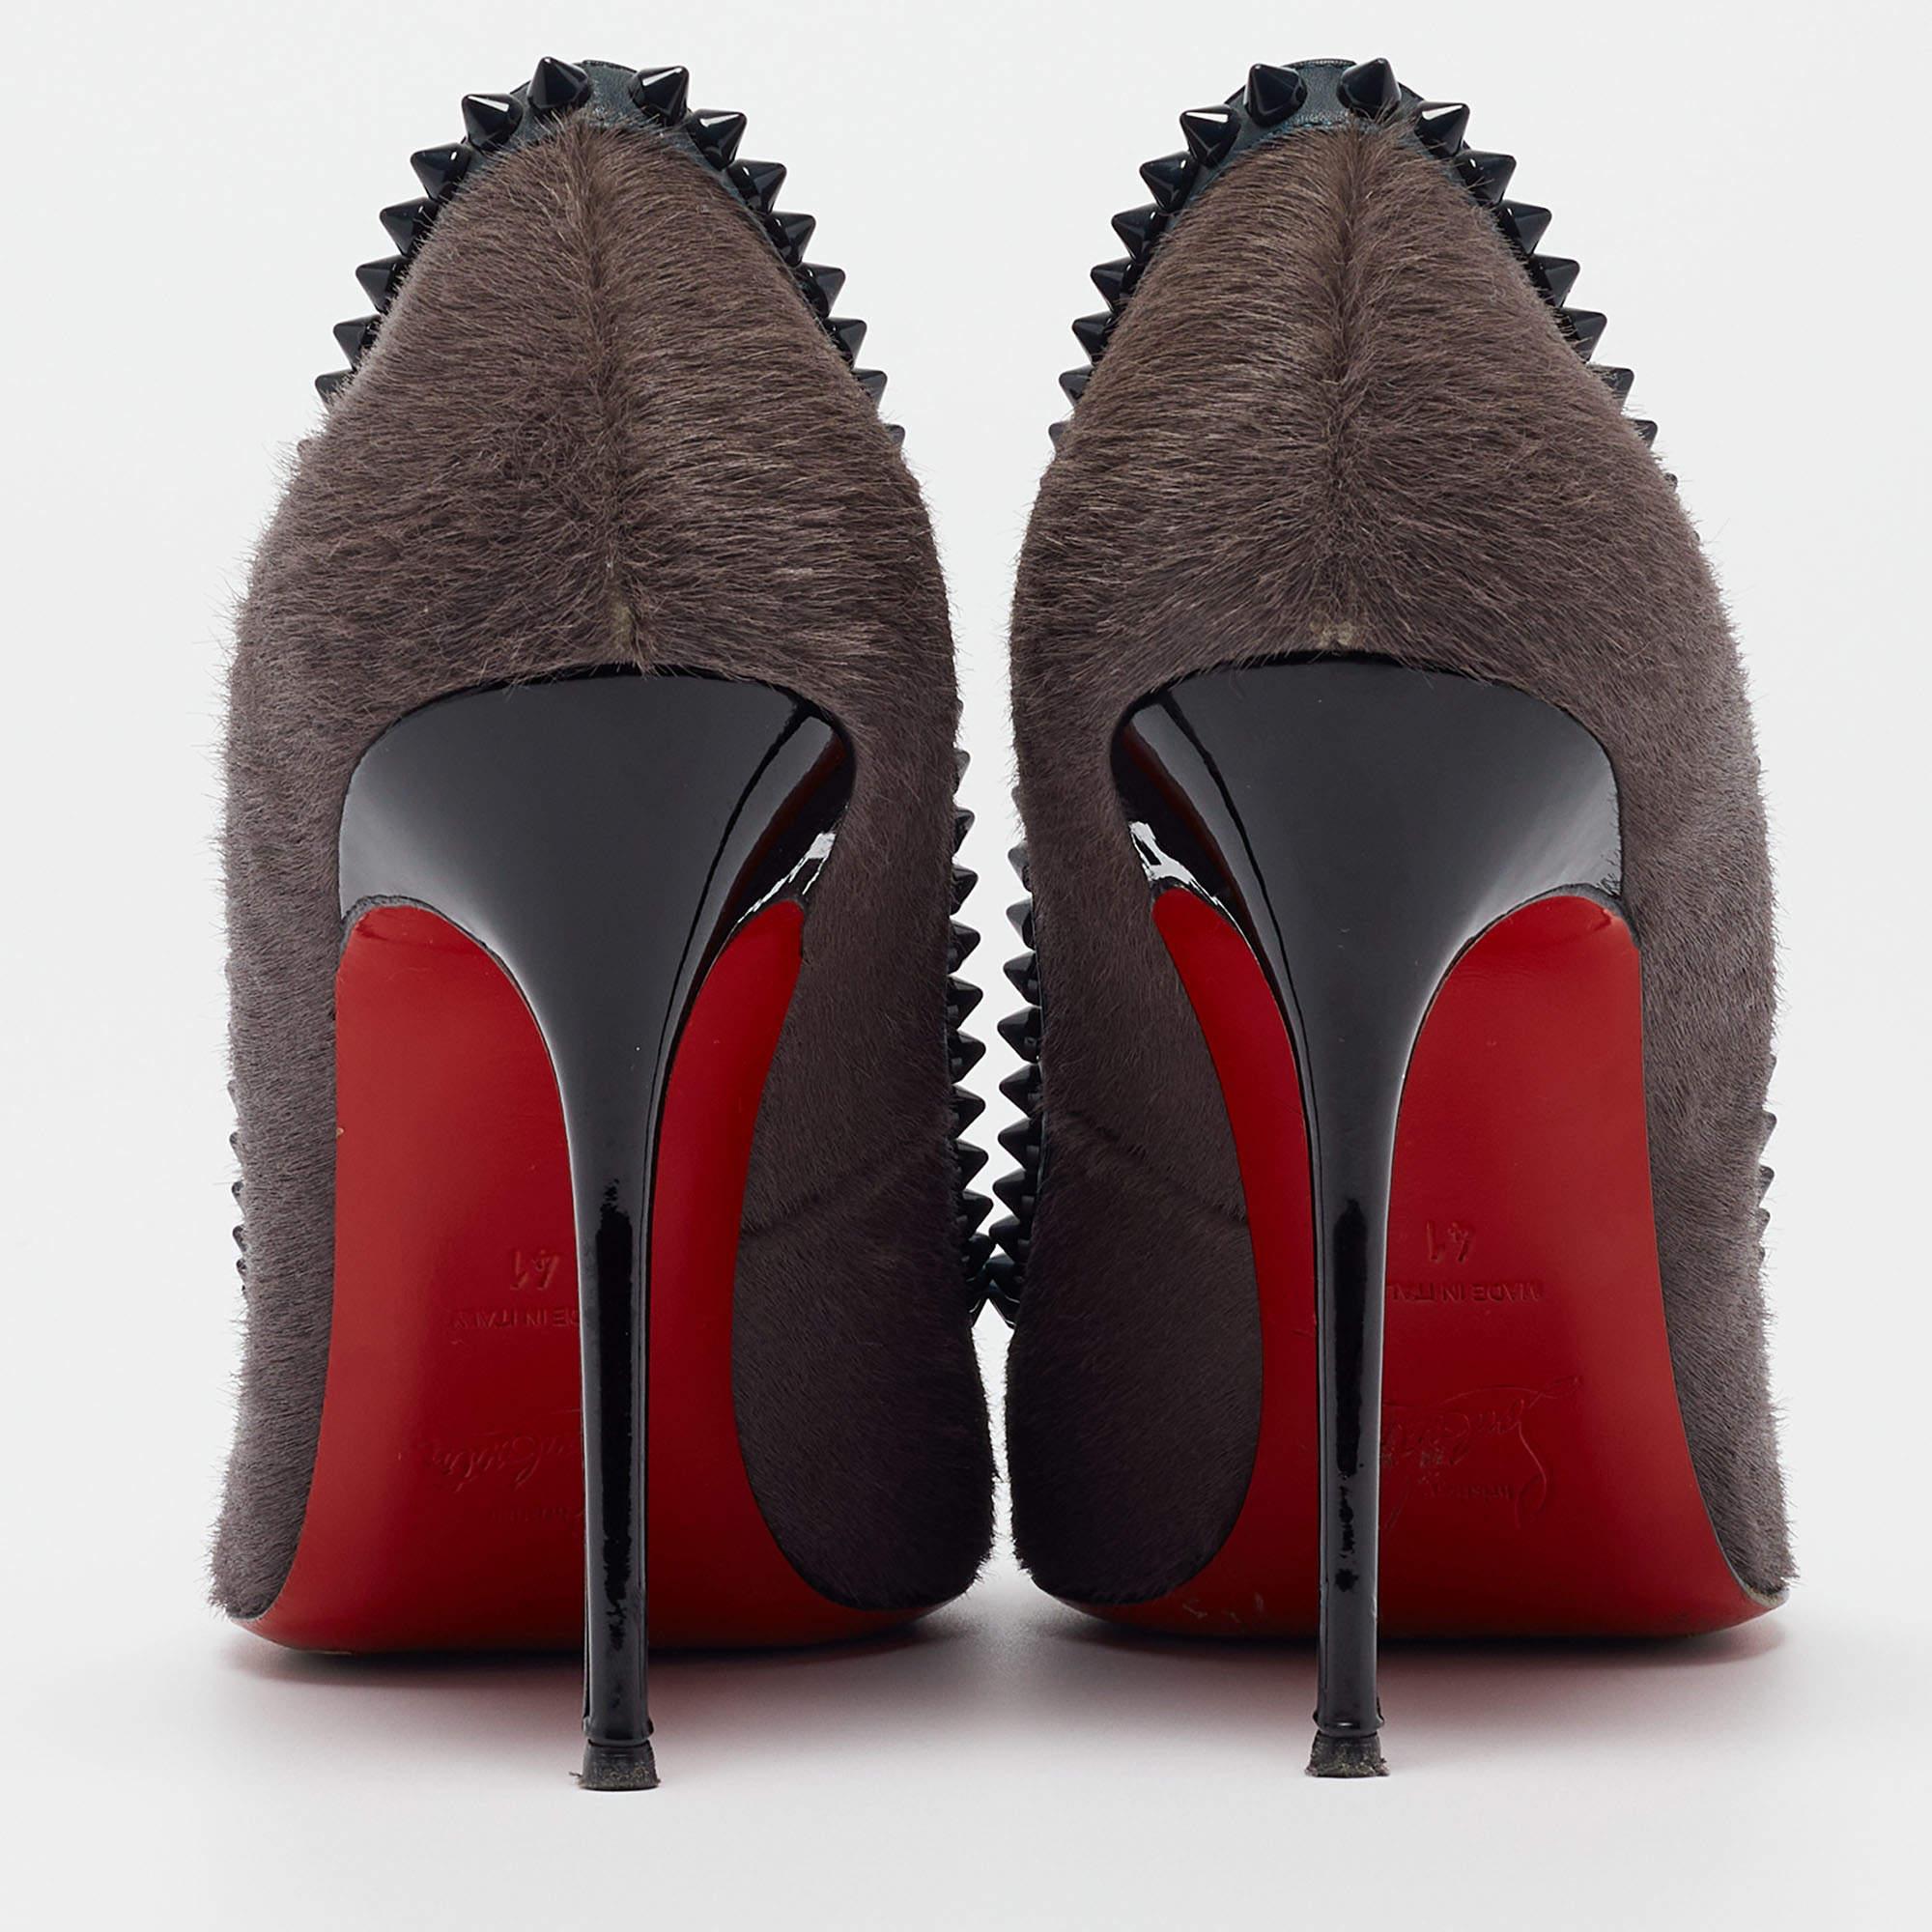 Christian Louboutin Multicolor Calf Hair and Leather Malabar Hill Spiked Pointed For Sale 2